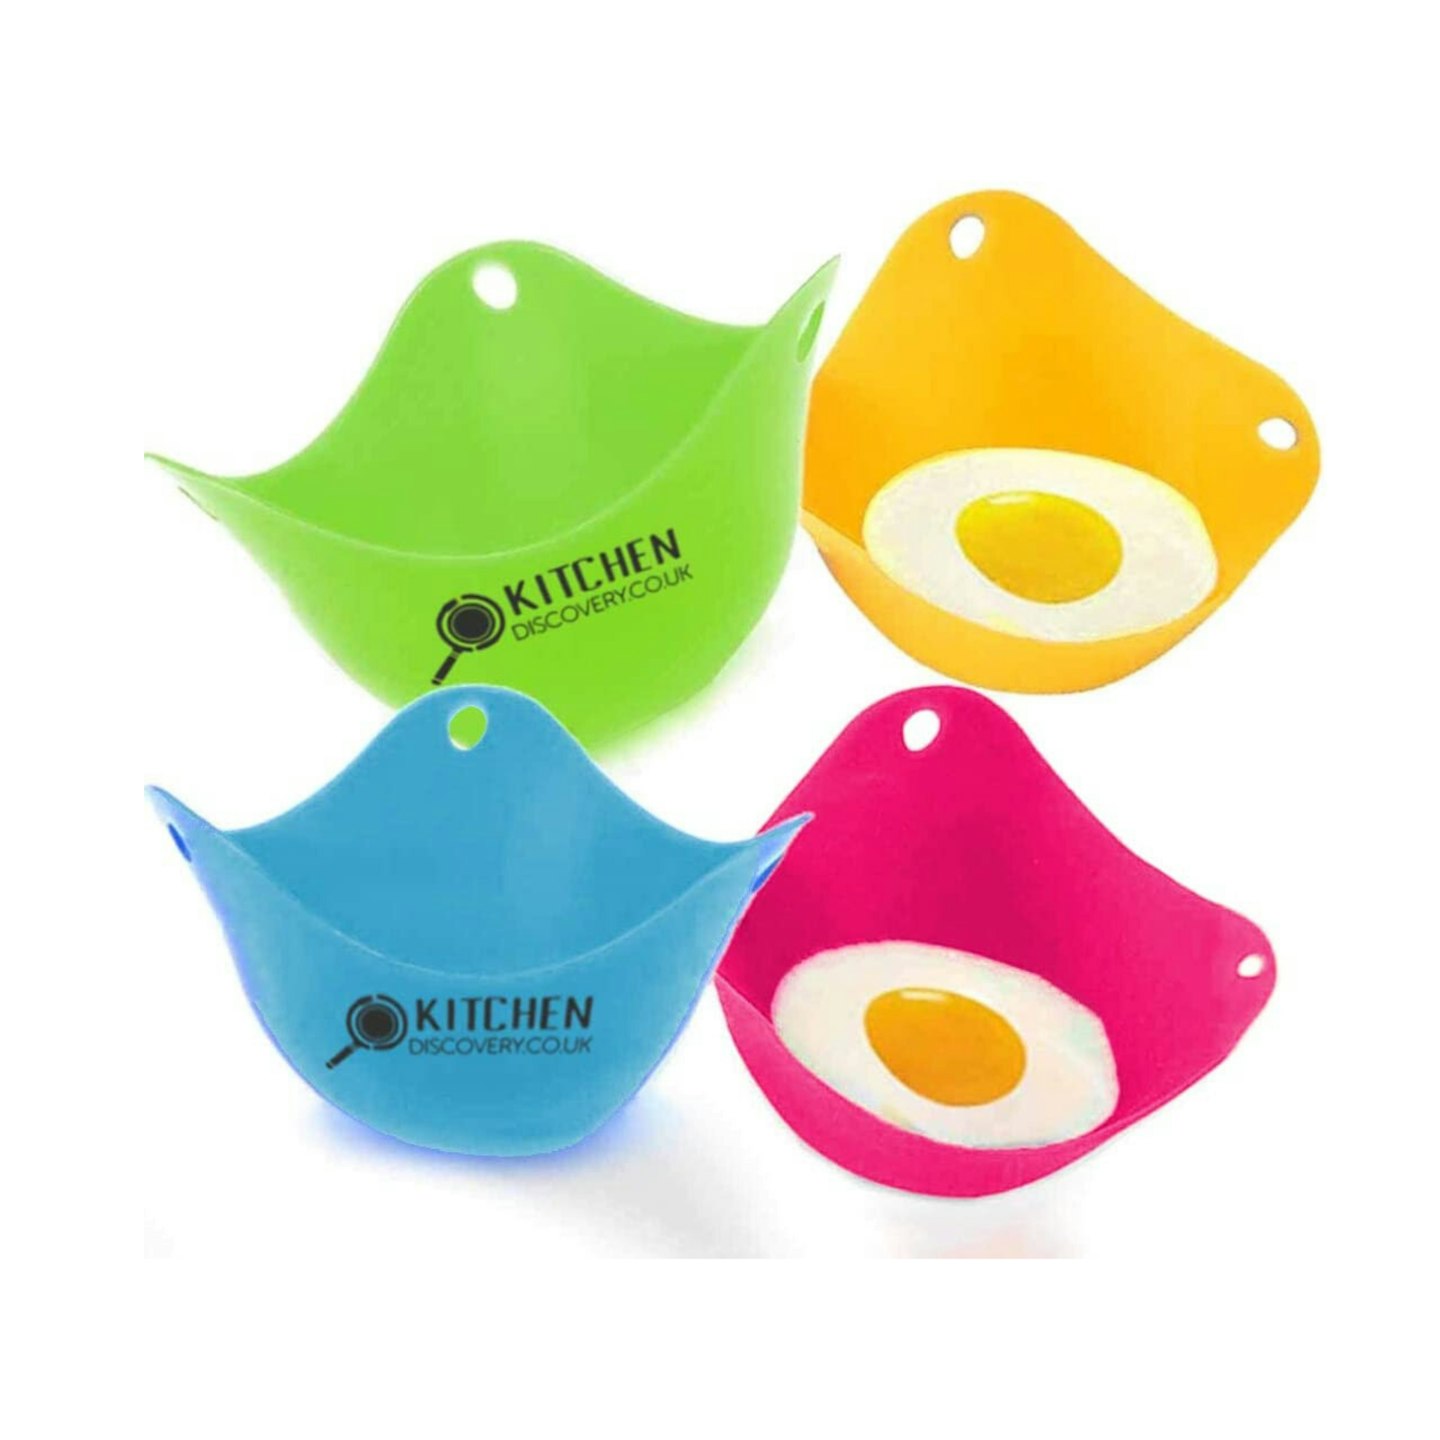 Egg Poacher Cups For Cooking Poached Eggs